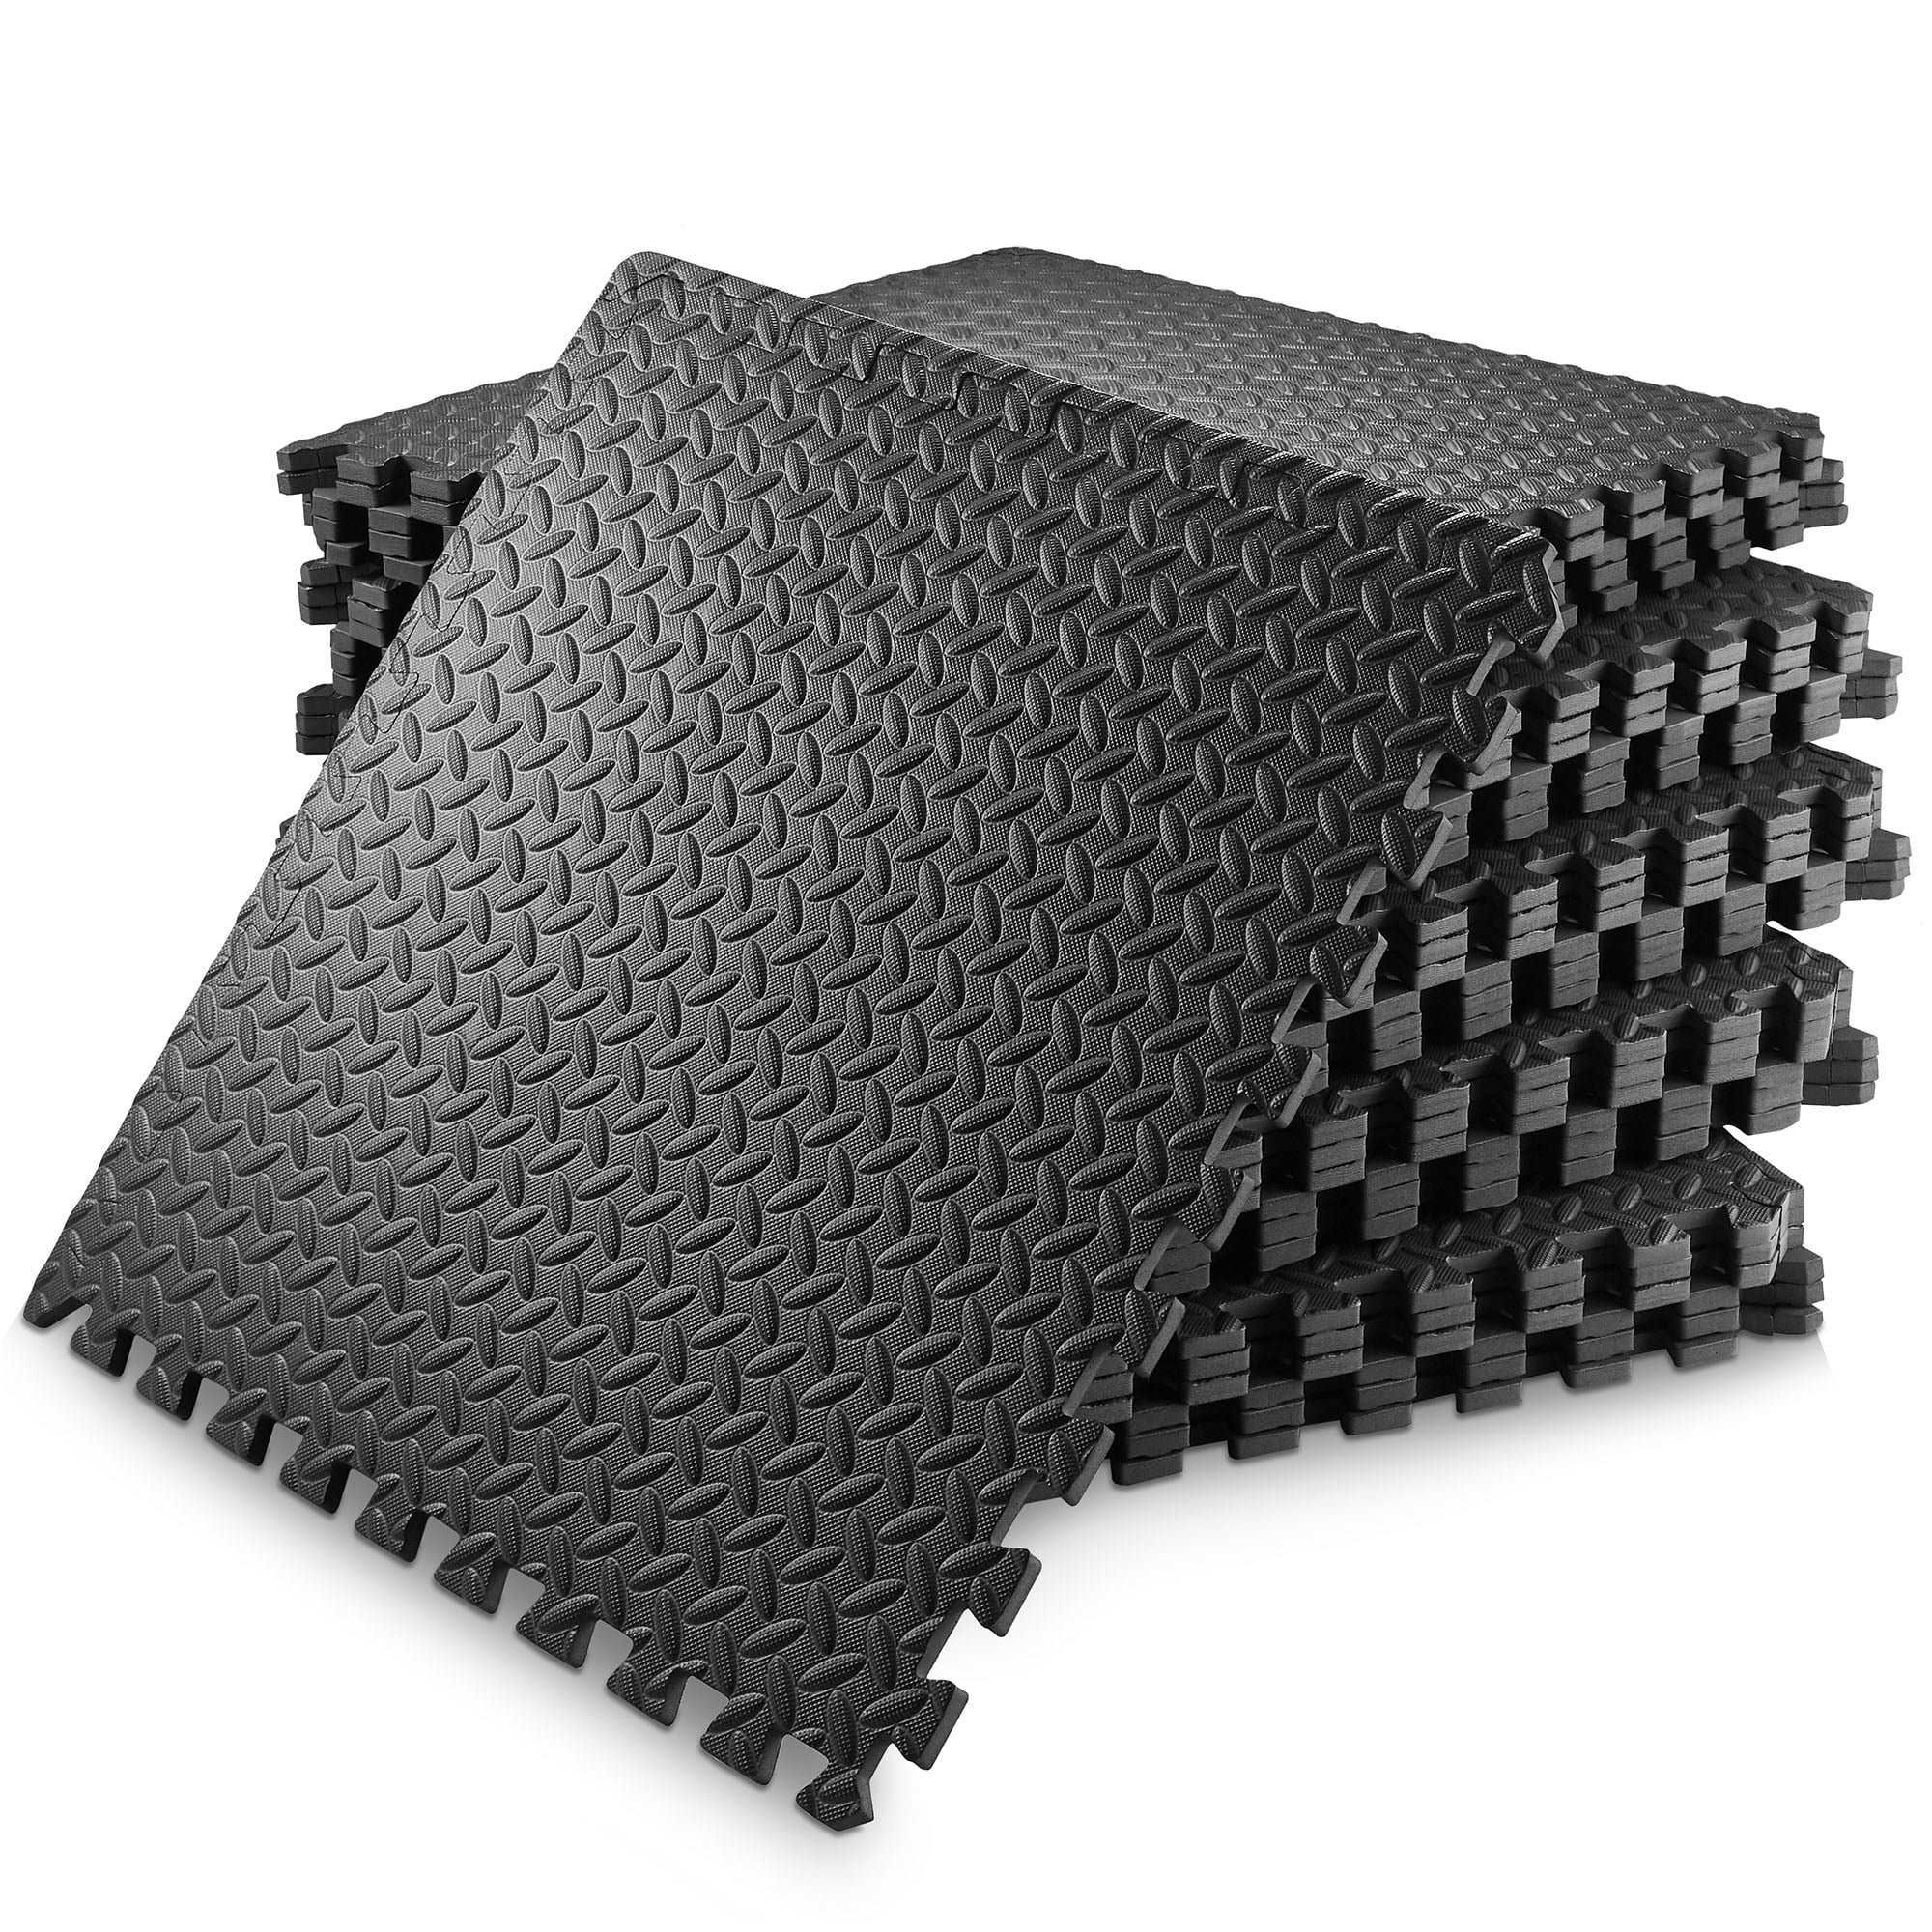 ISO Interlocking Heavy Duty Rubber Gym Mats Puzzle Tiles